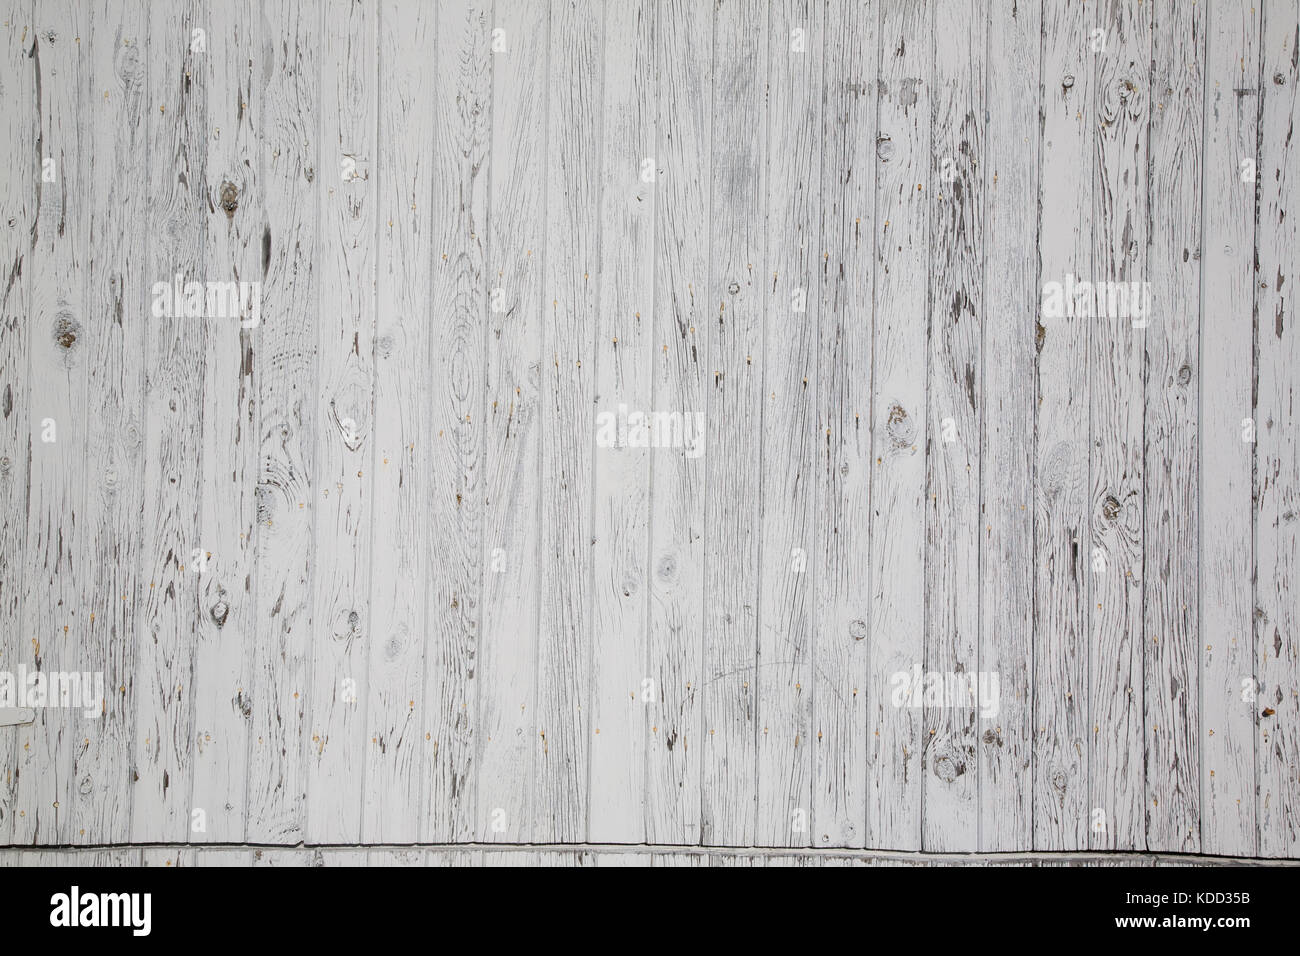 A background of weathered wood painted white Stock Photo